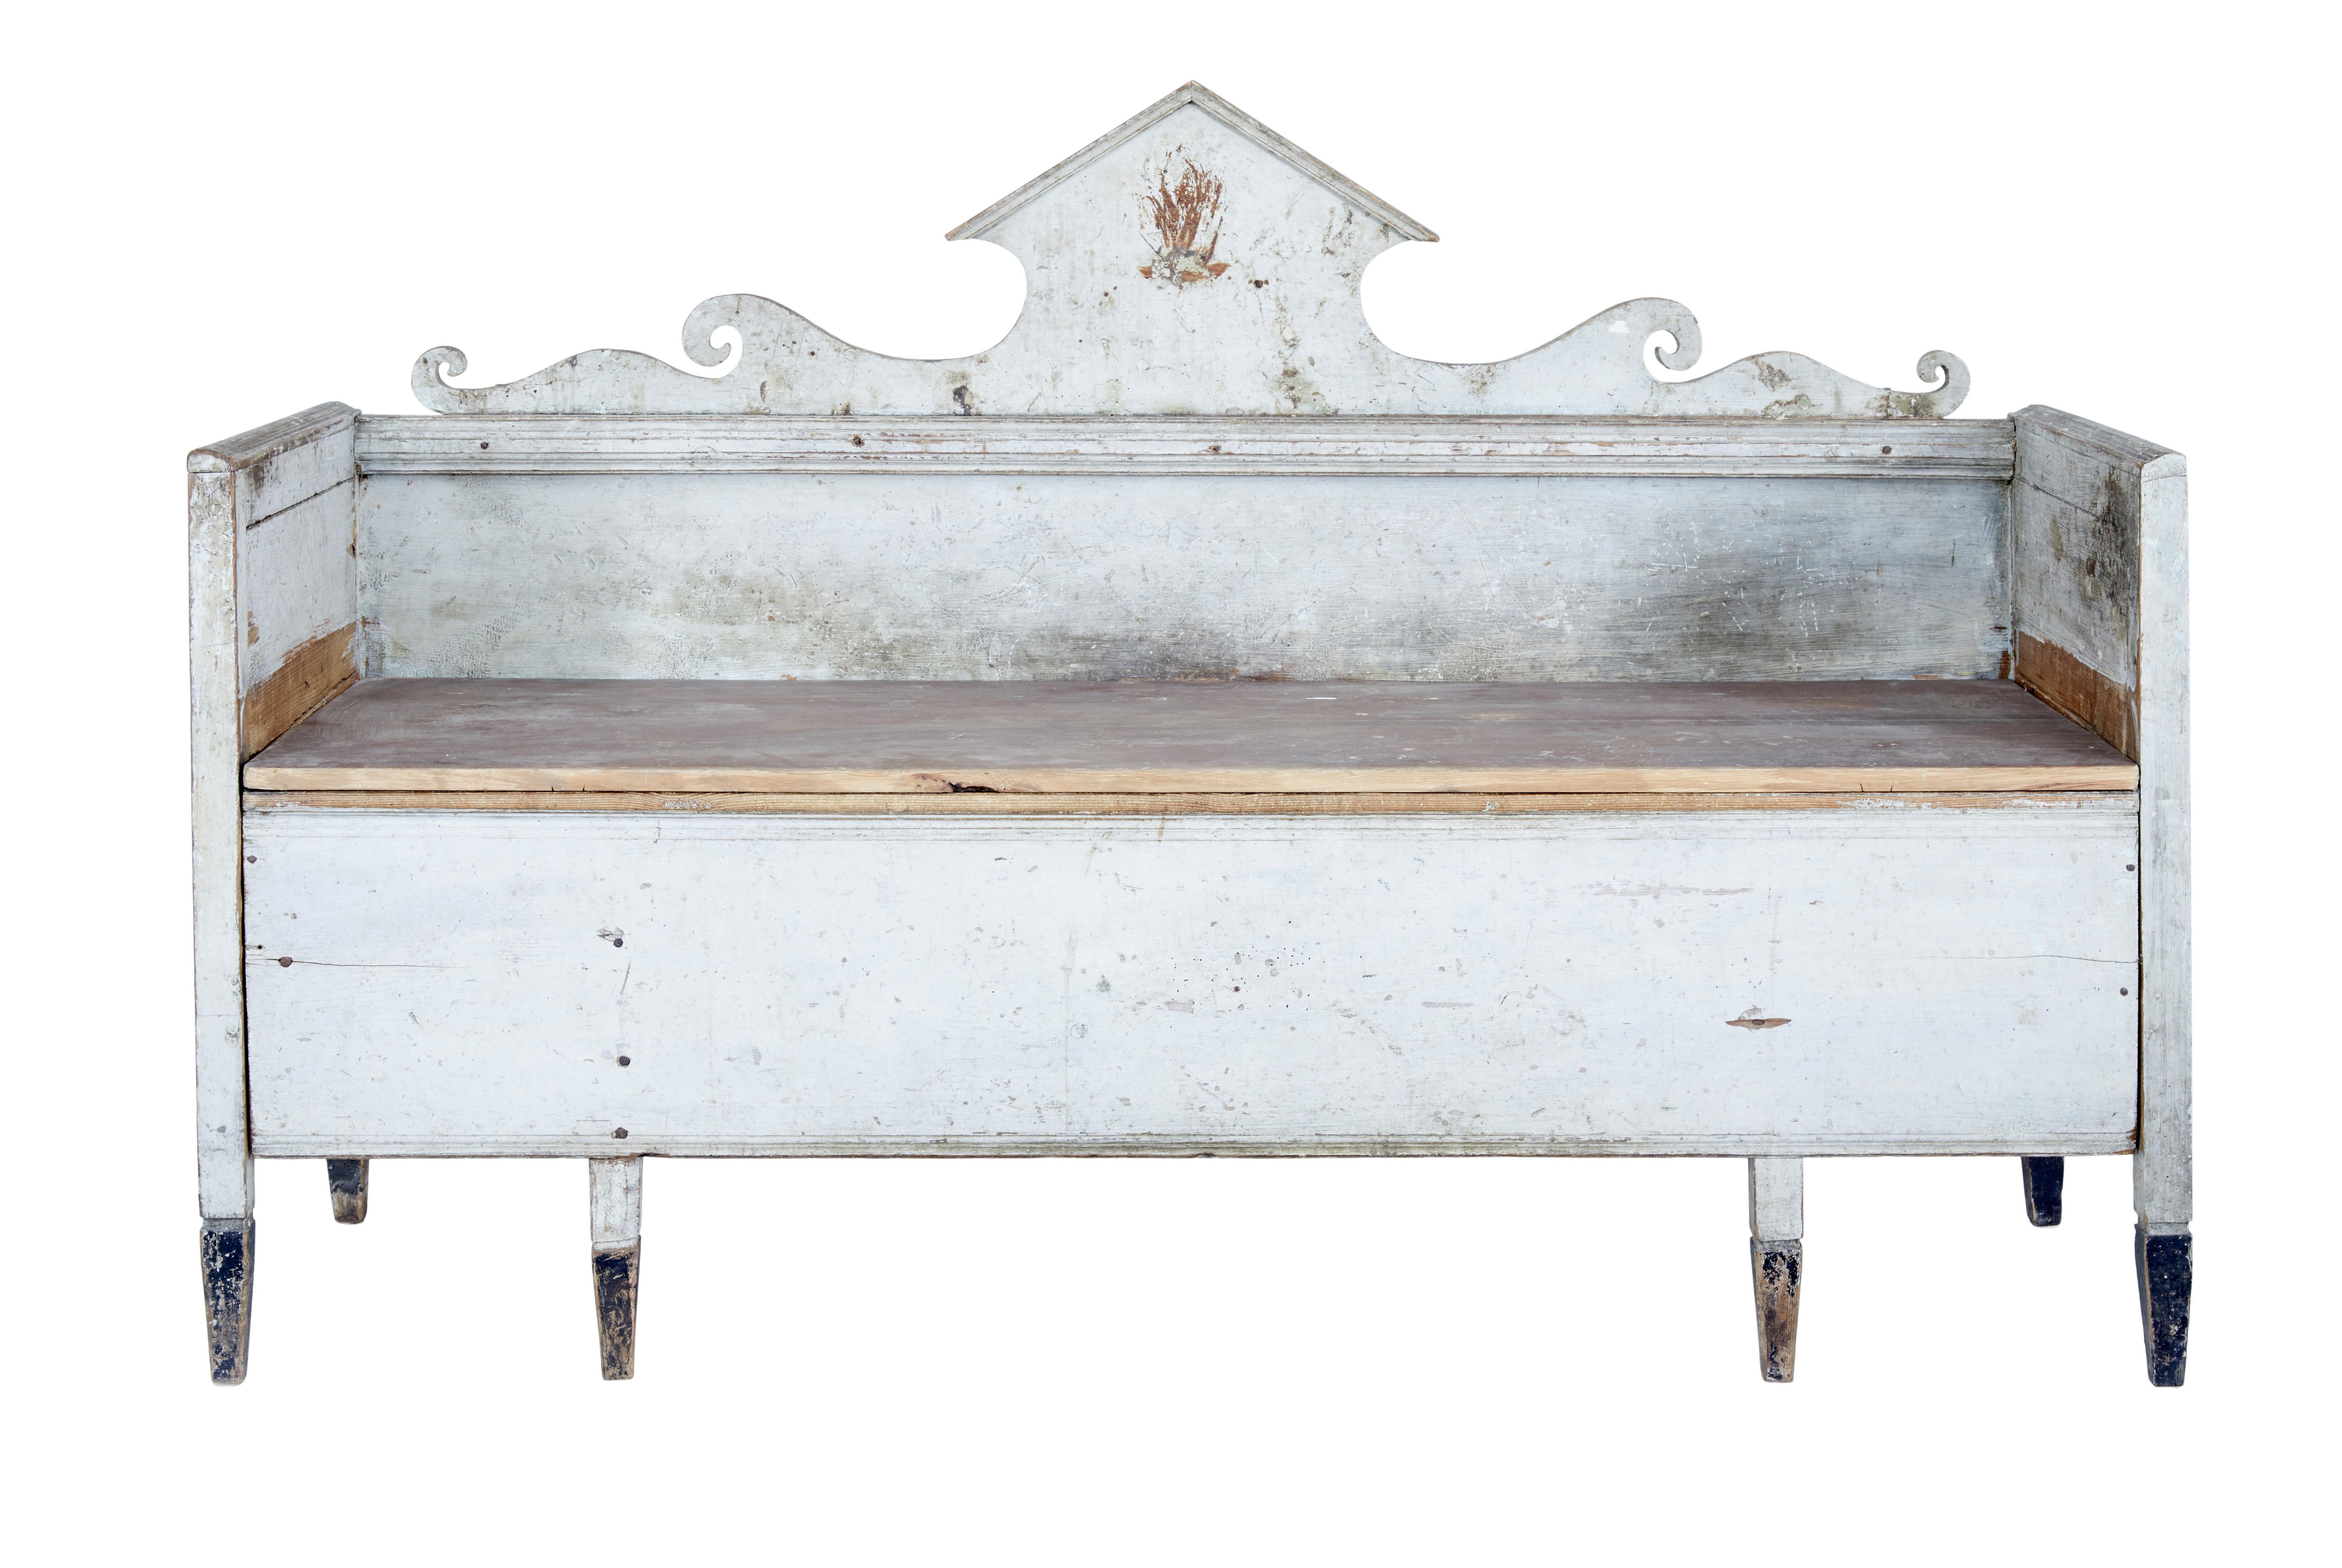 Swedish early 19th century Gustavian painted sofa circa 1810.

Stunning sofa in original paint. This would have been a day bed with a pull out section to the front, but it has since been sealed shut, this could be released if desired.

Pediment